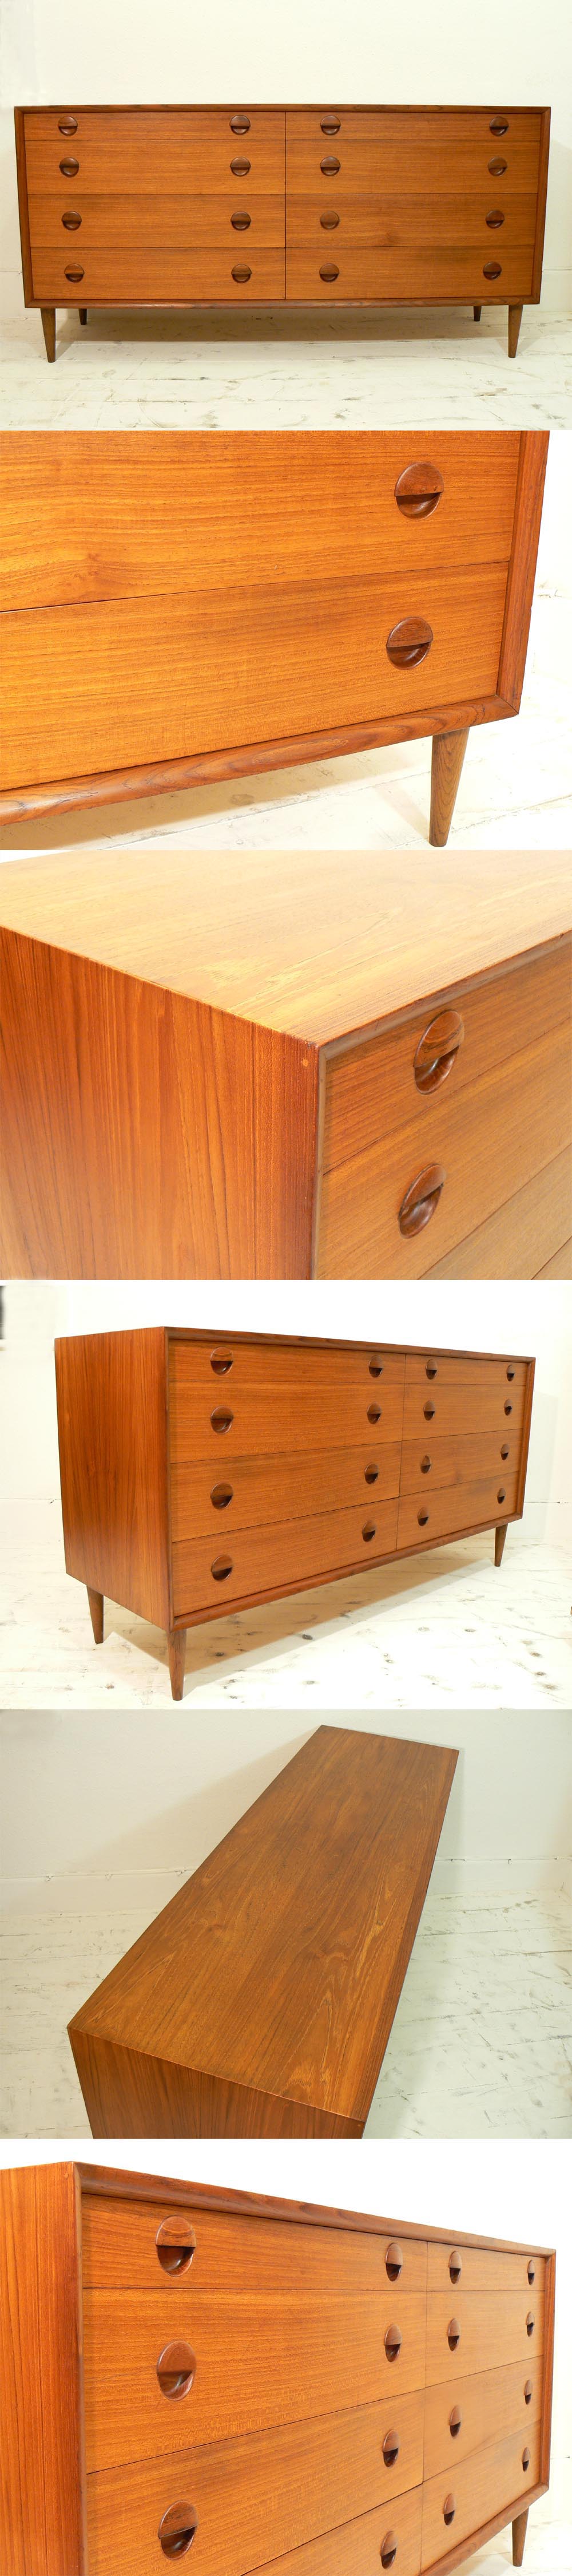 A teak chest of draws c1960s manufactured by Sibast furniture and designed by Arne Vodder